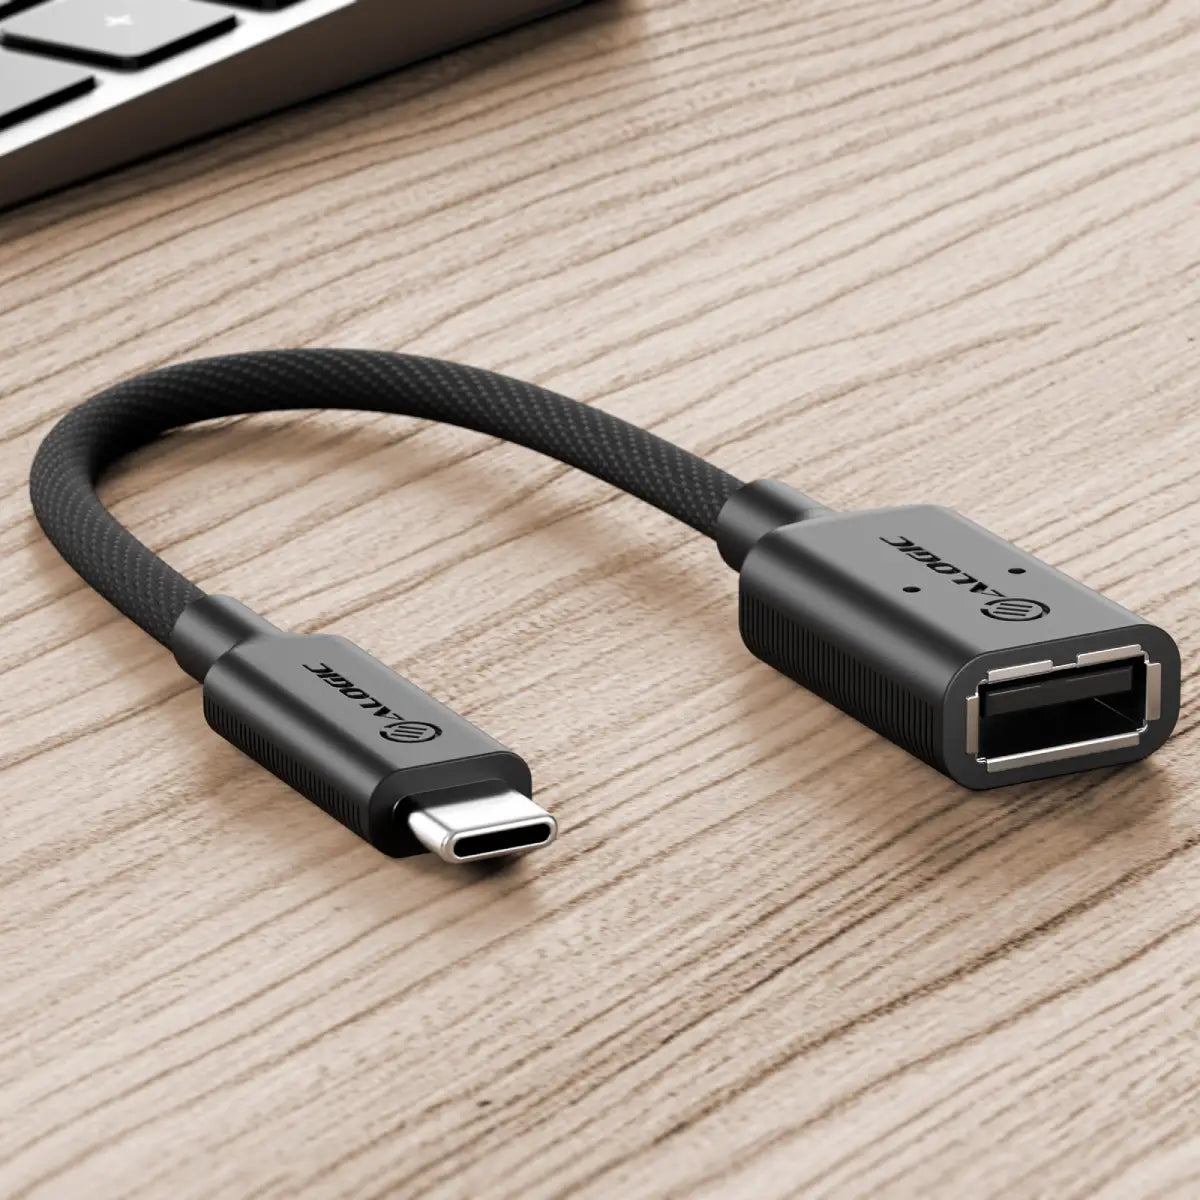 Elements Pro USB-C (Male) to USB-A (Female) Adapter